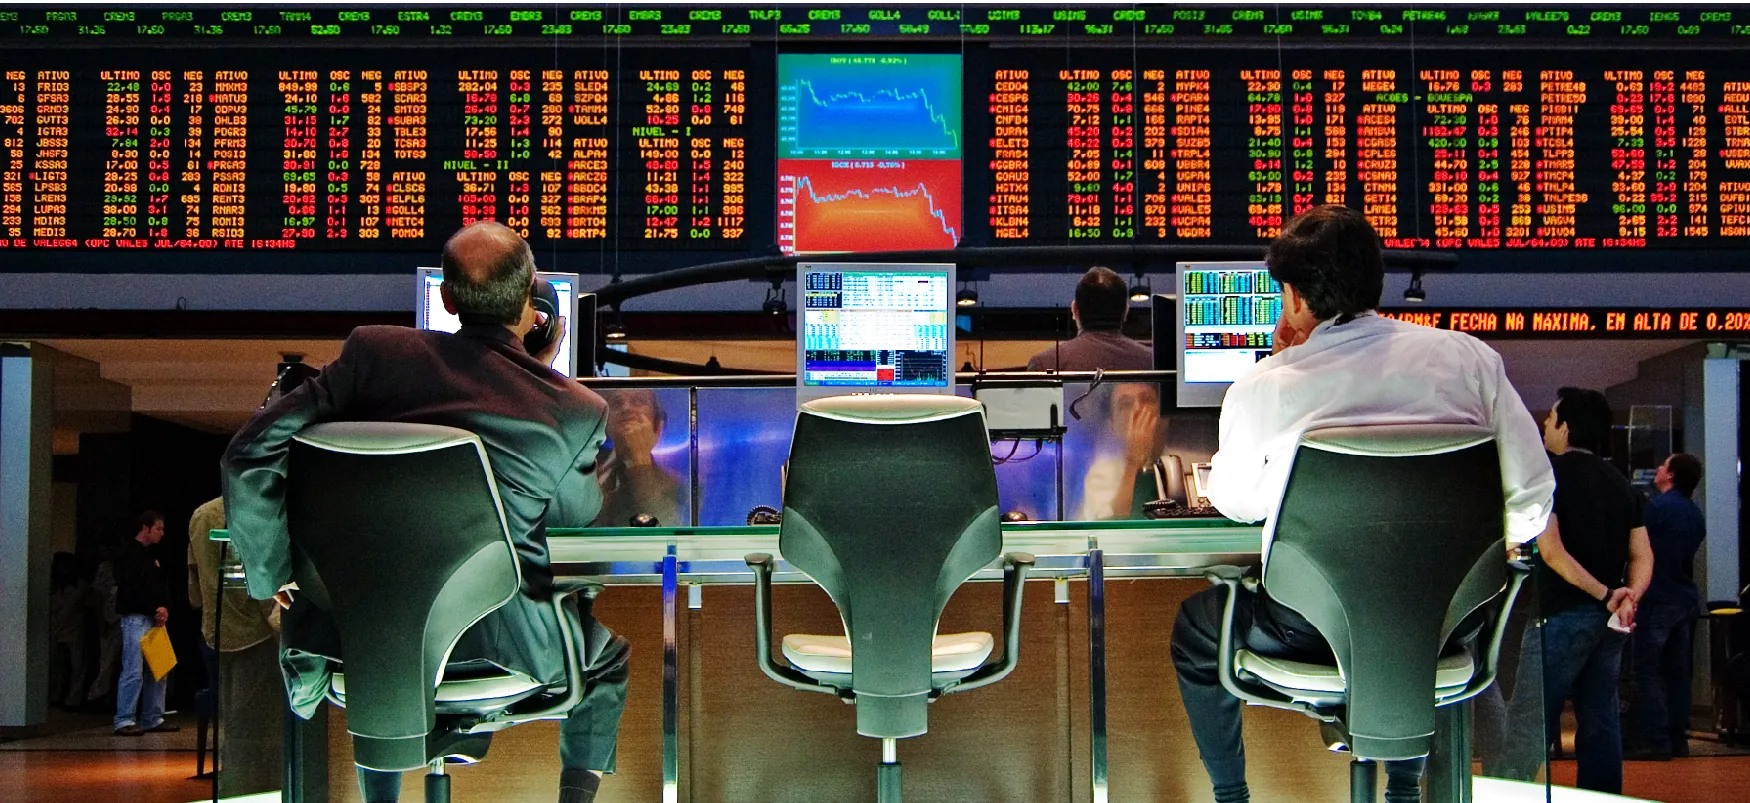 Two stockbrokers sit on chairs and look at the stock tickers on a giant screen. Two graphs are displayed in the middle of the screen, showing a downward trend.